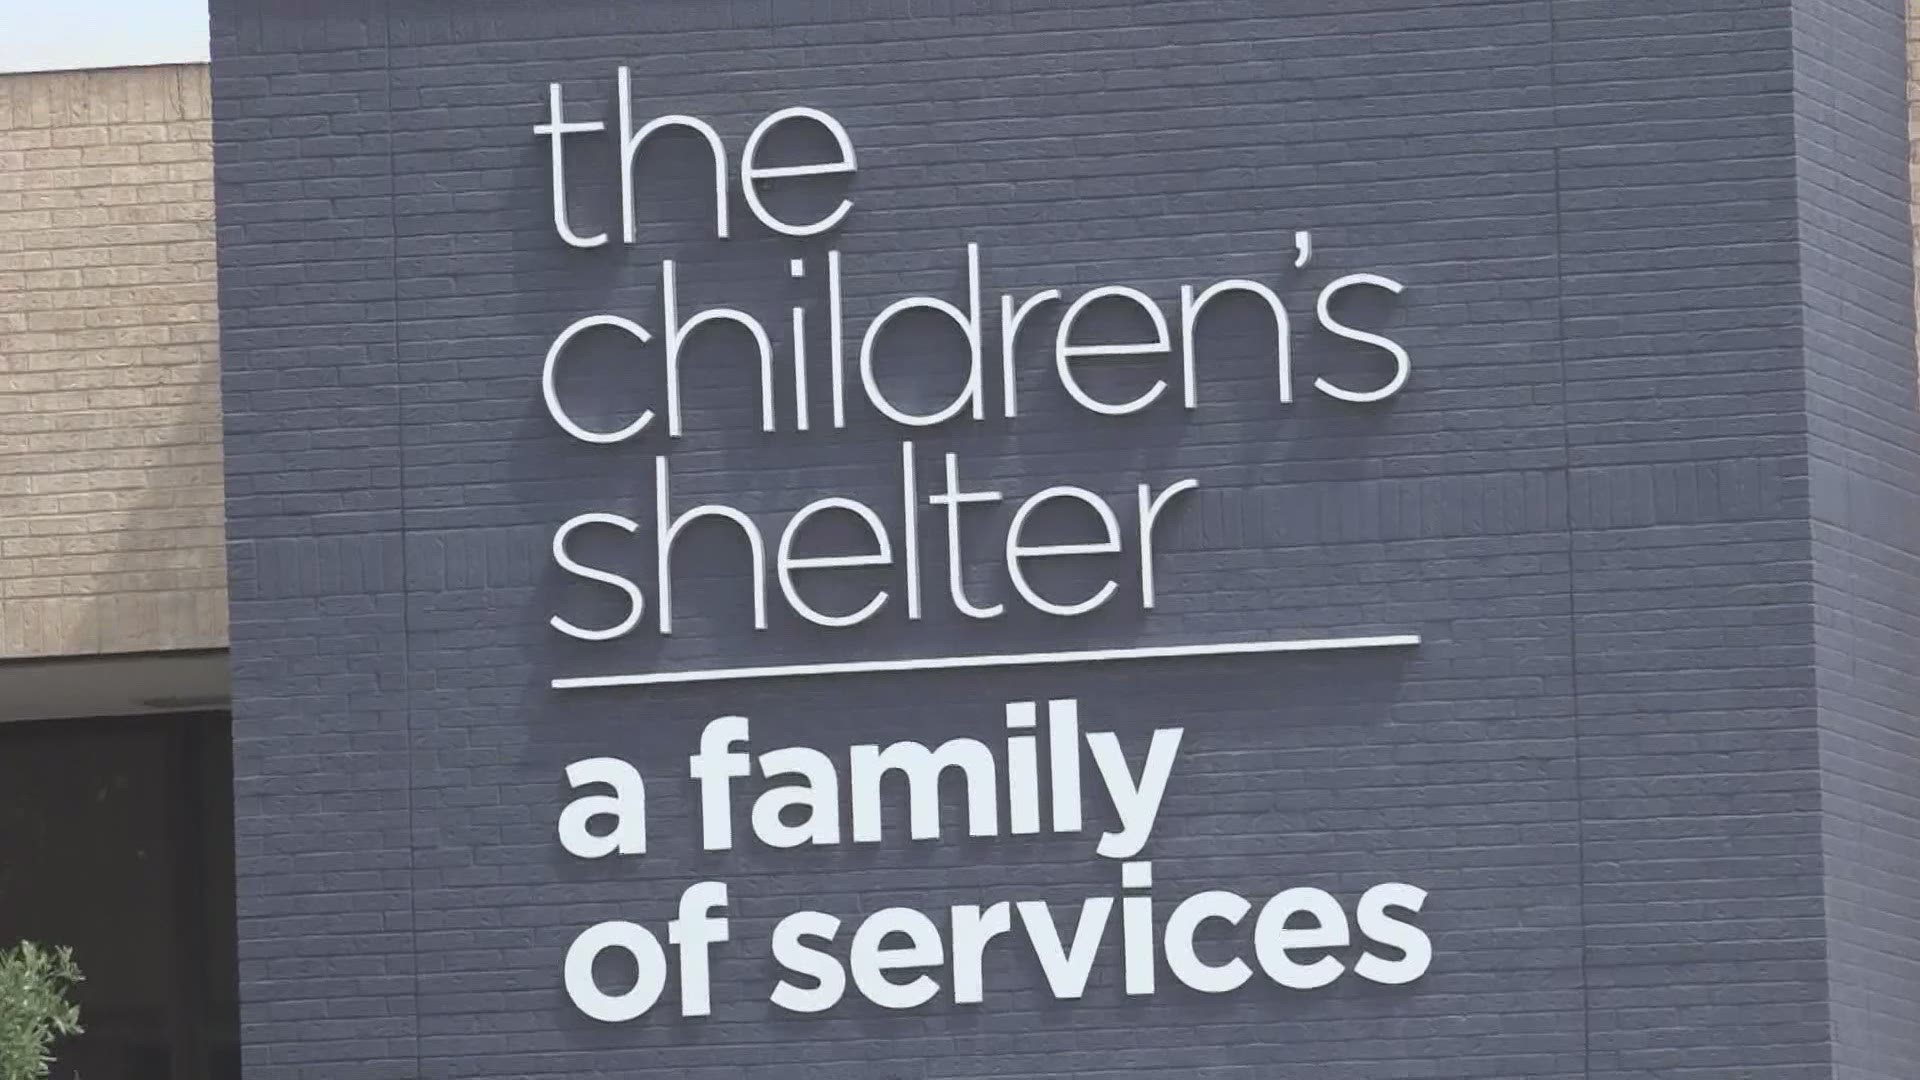 The 66-bed emergency care center known as the Cottage at the Children’s Shelter is being closed after the Texas DFPS put a placement hold on the facility.